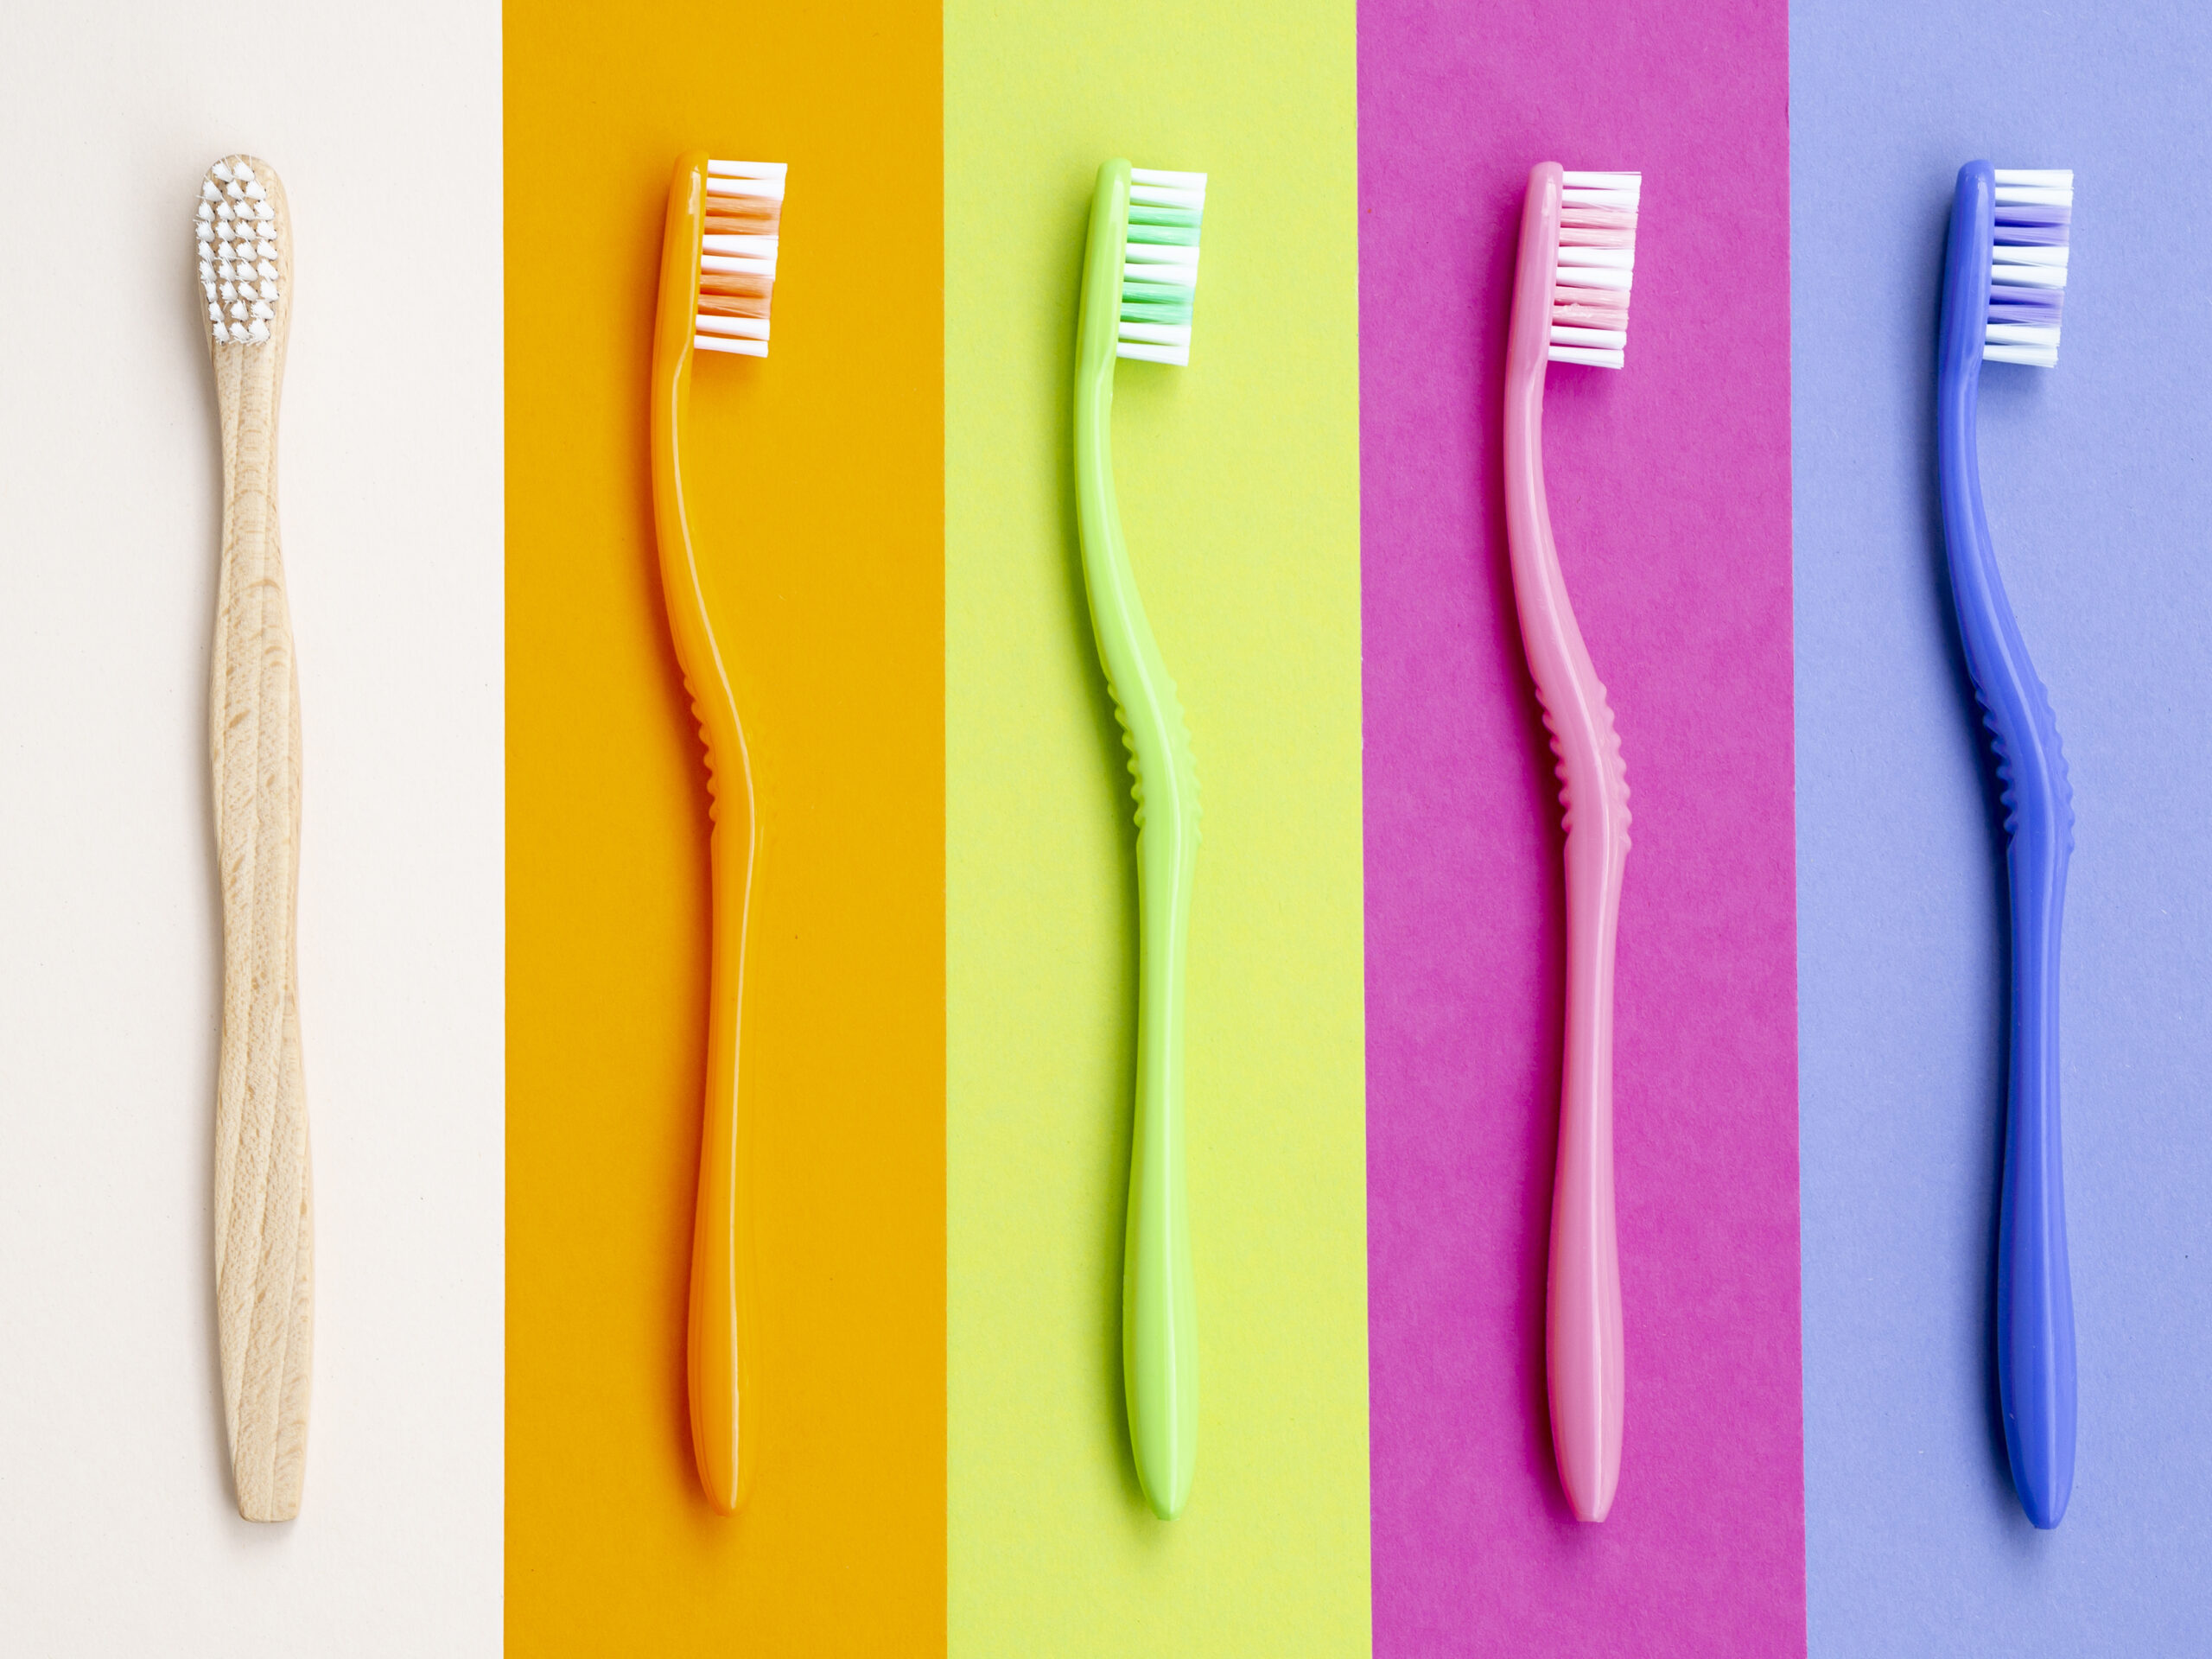 Toothbrush knowhow: choosing a toothbrush